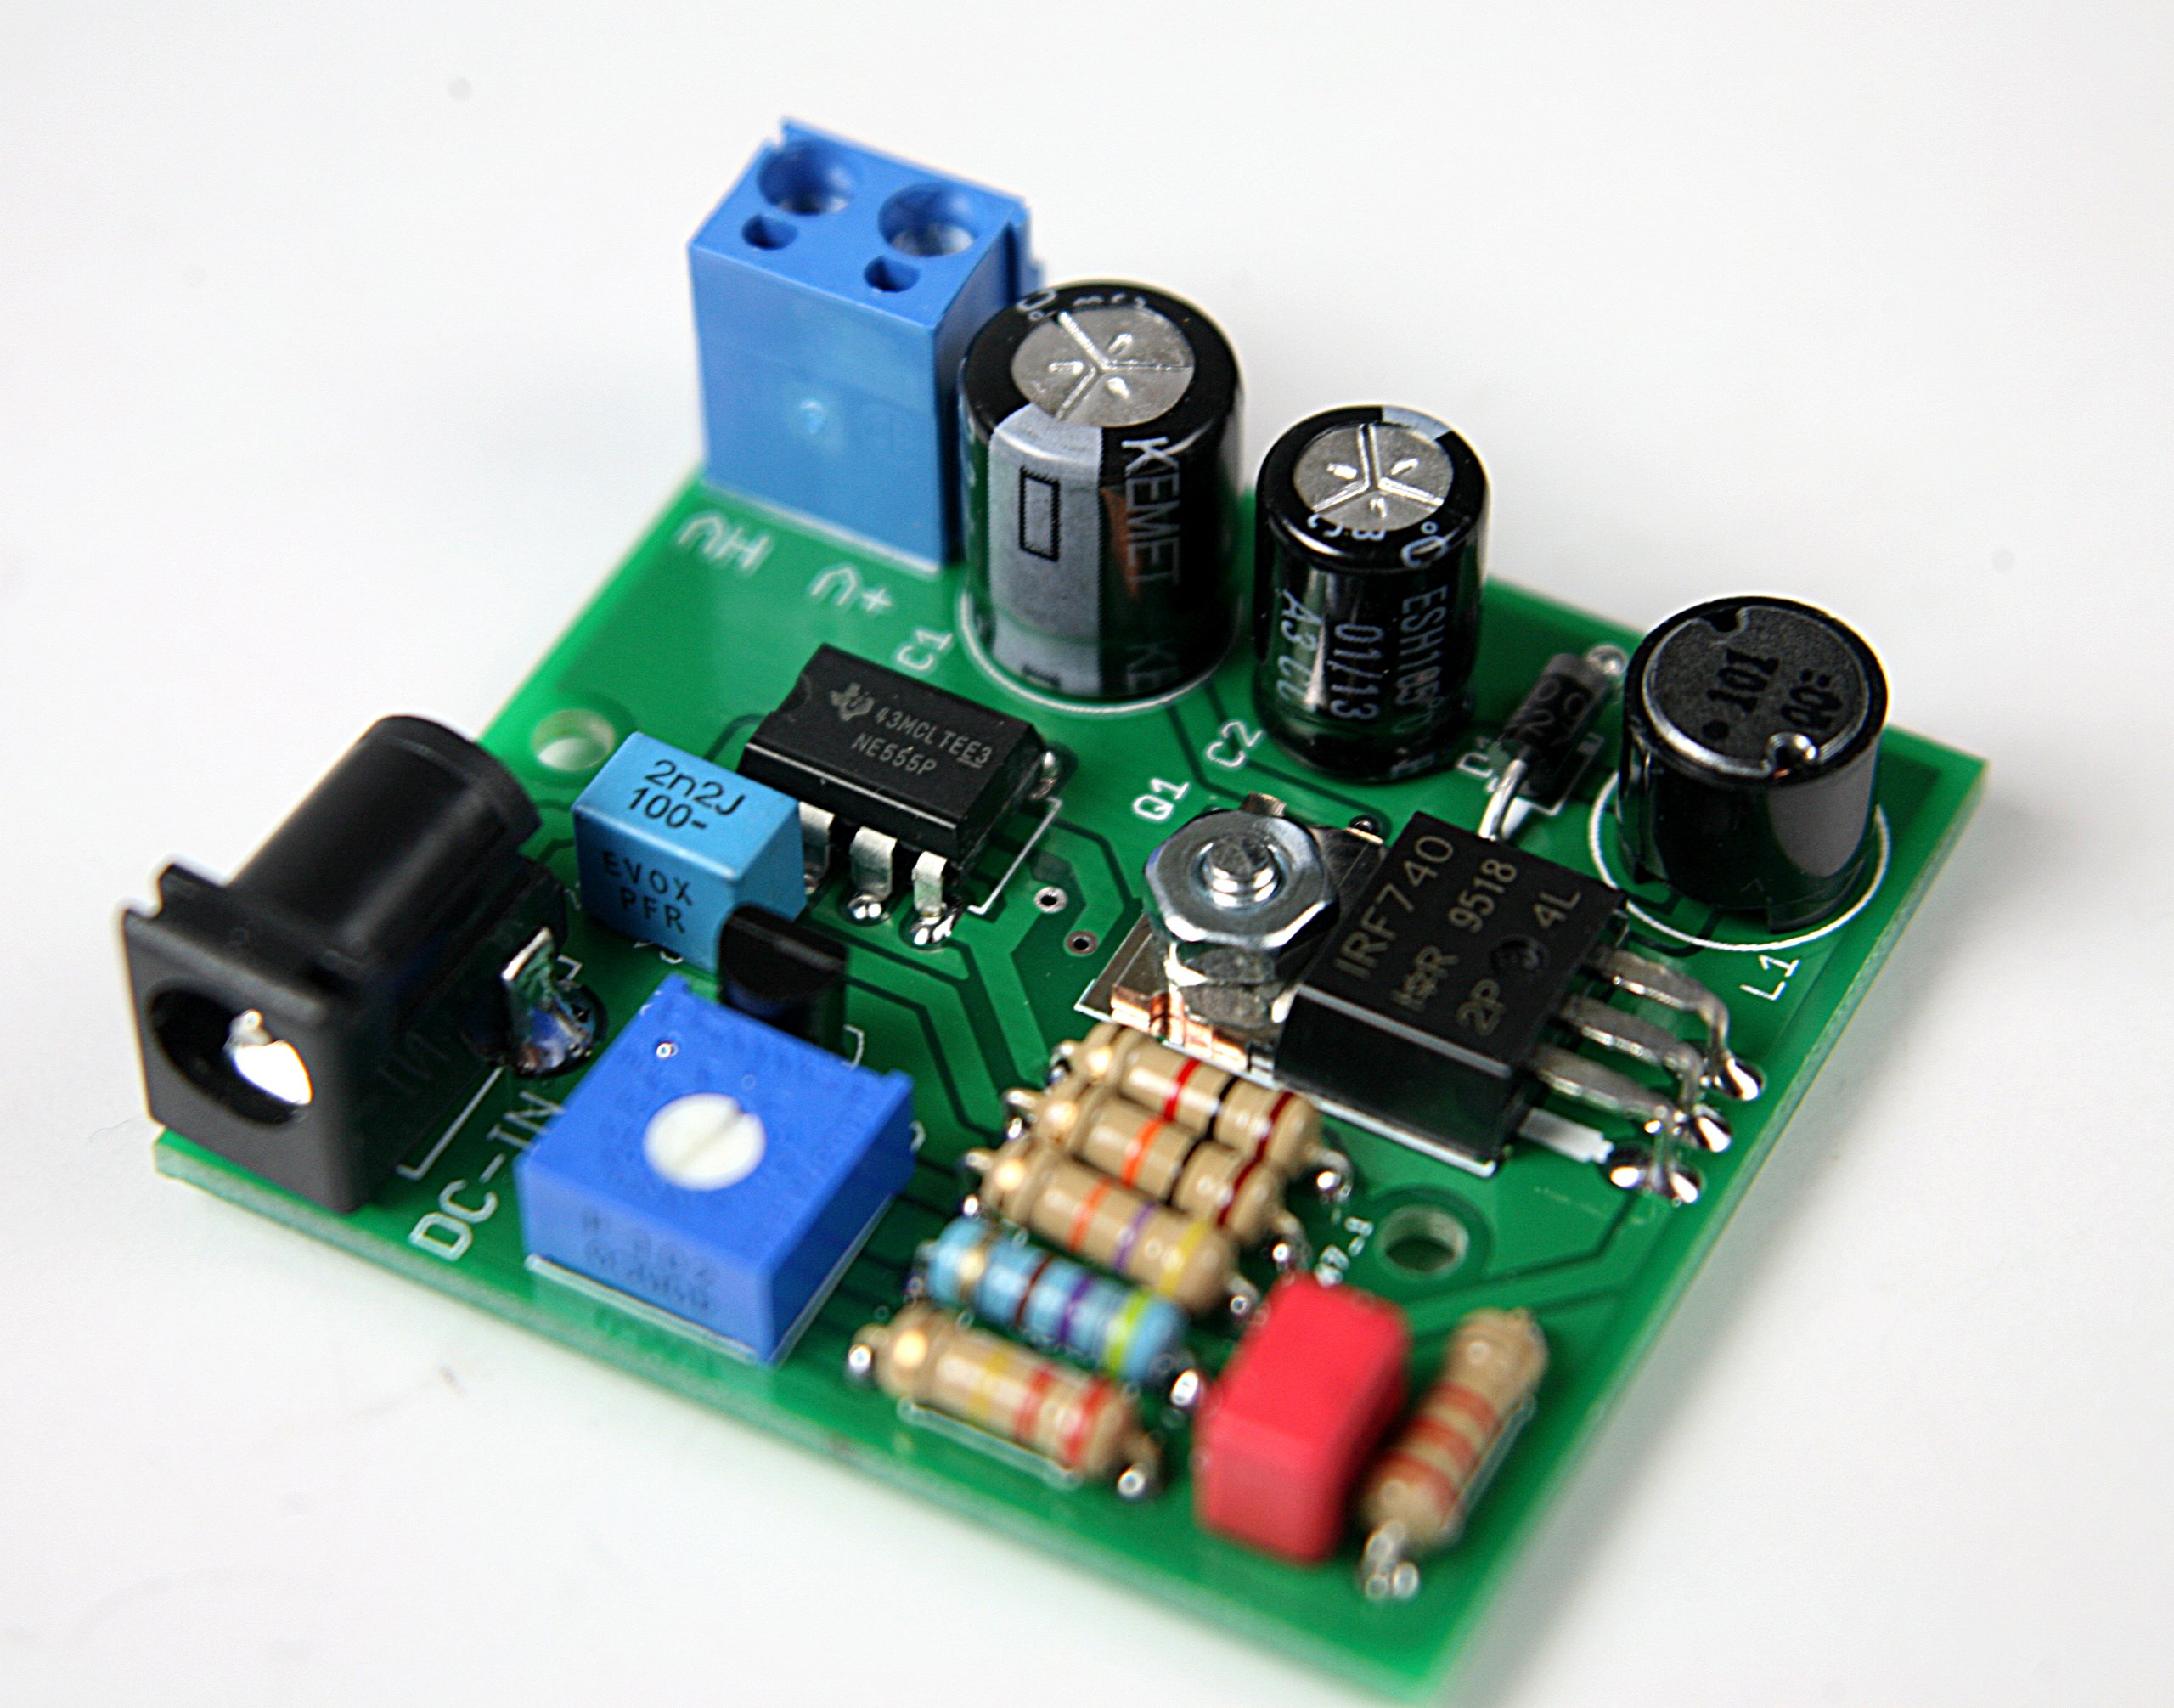 High Voltage DC Power Supply - Nixie Projects from Steves_Hobby_Store